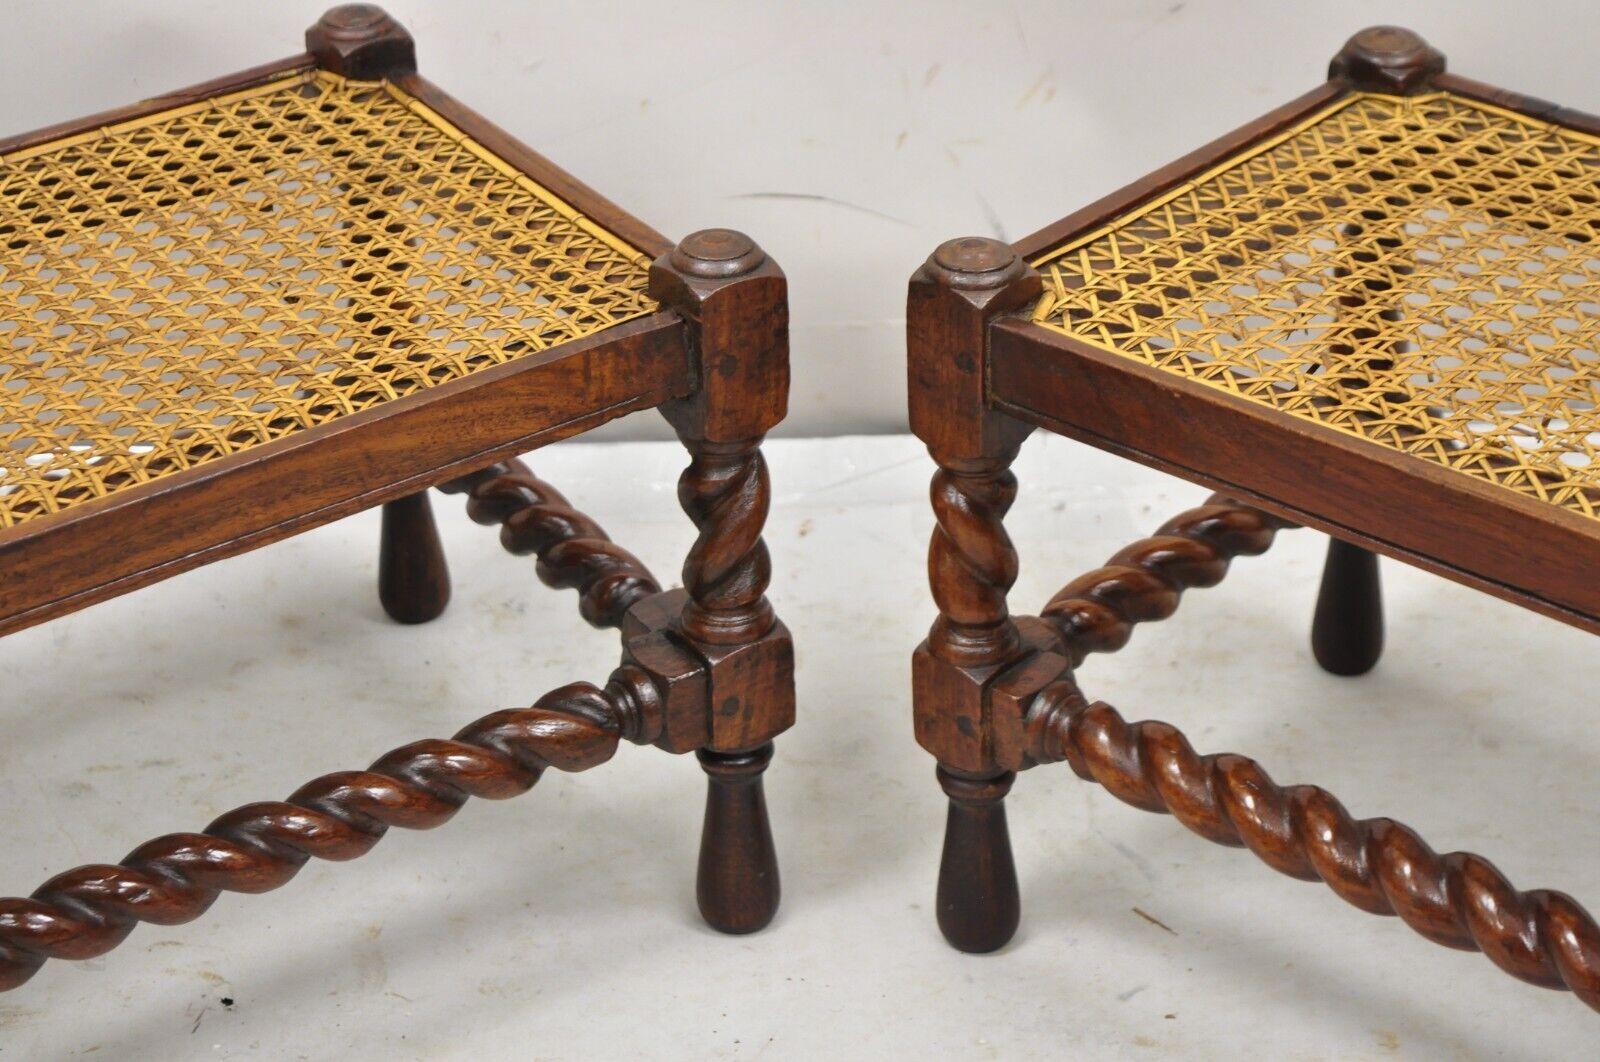 Antique Jacobean Turn Carved Walnut Handmade Cane Seat Footstool Ottoman - Pair In Good Condition For Sale In Philadelphia, PA